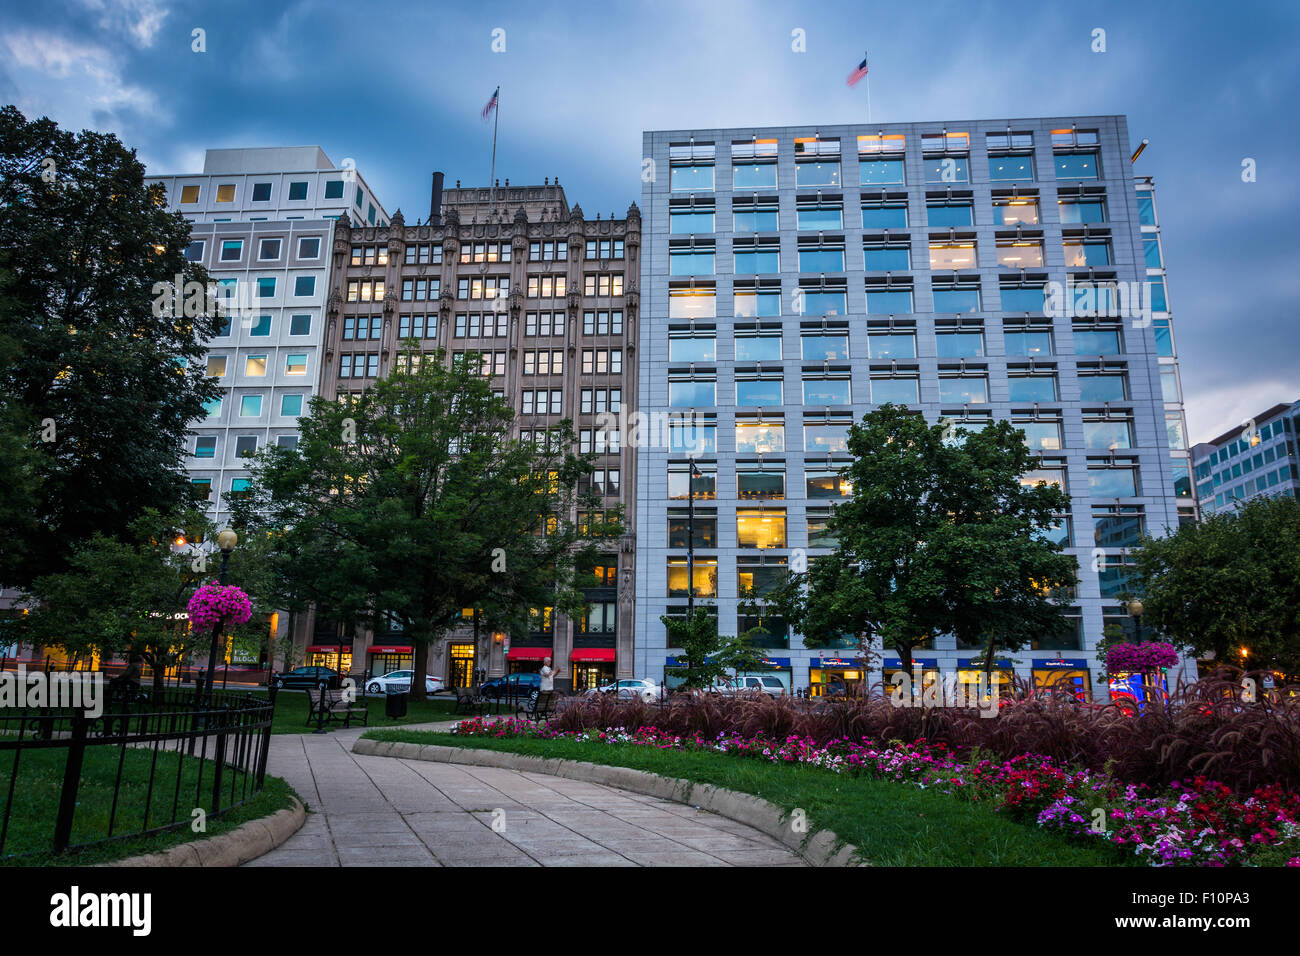 Garden and buildings seen at Farragut Square at twilight, in Washington, DC. Stock Photo